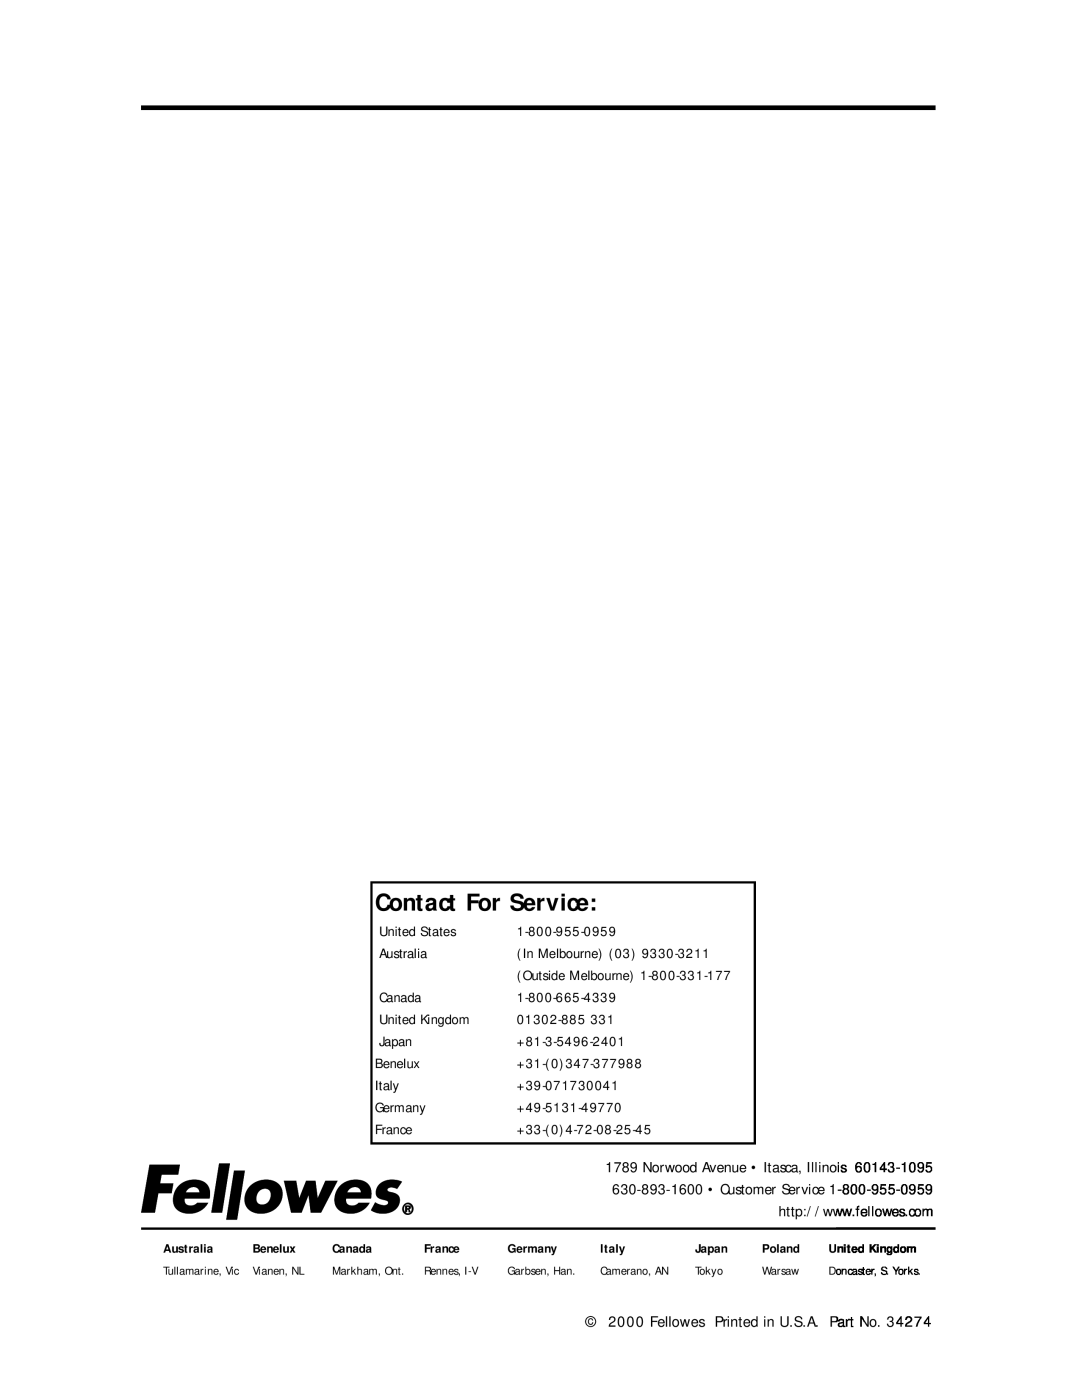 Fellowes 2000, 1000 manual Contact For Service, Fellowes Printed in U.S.A. Part No 